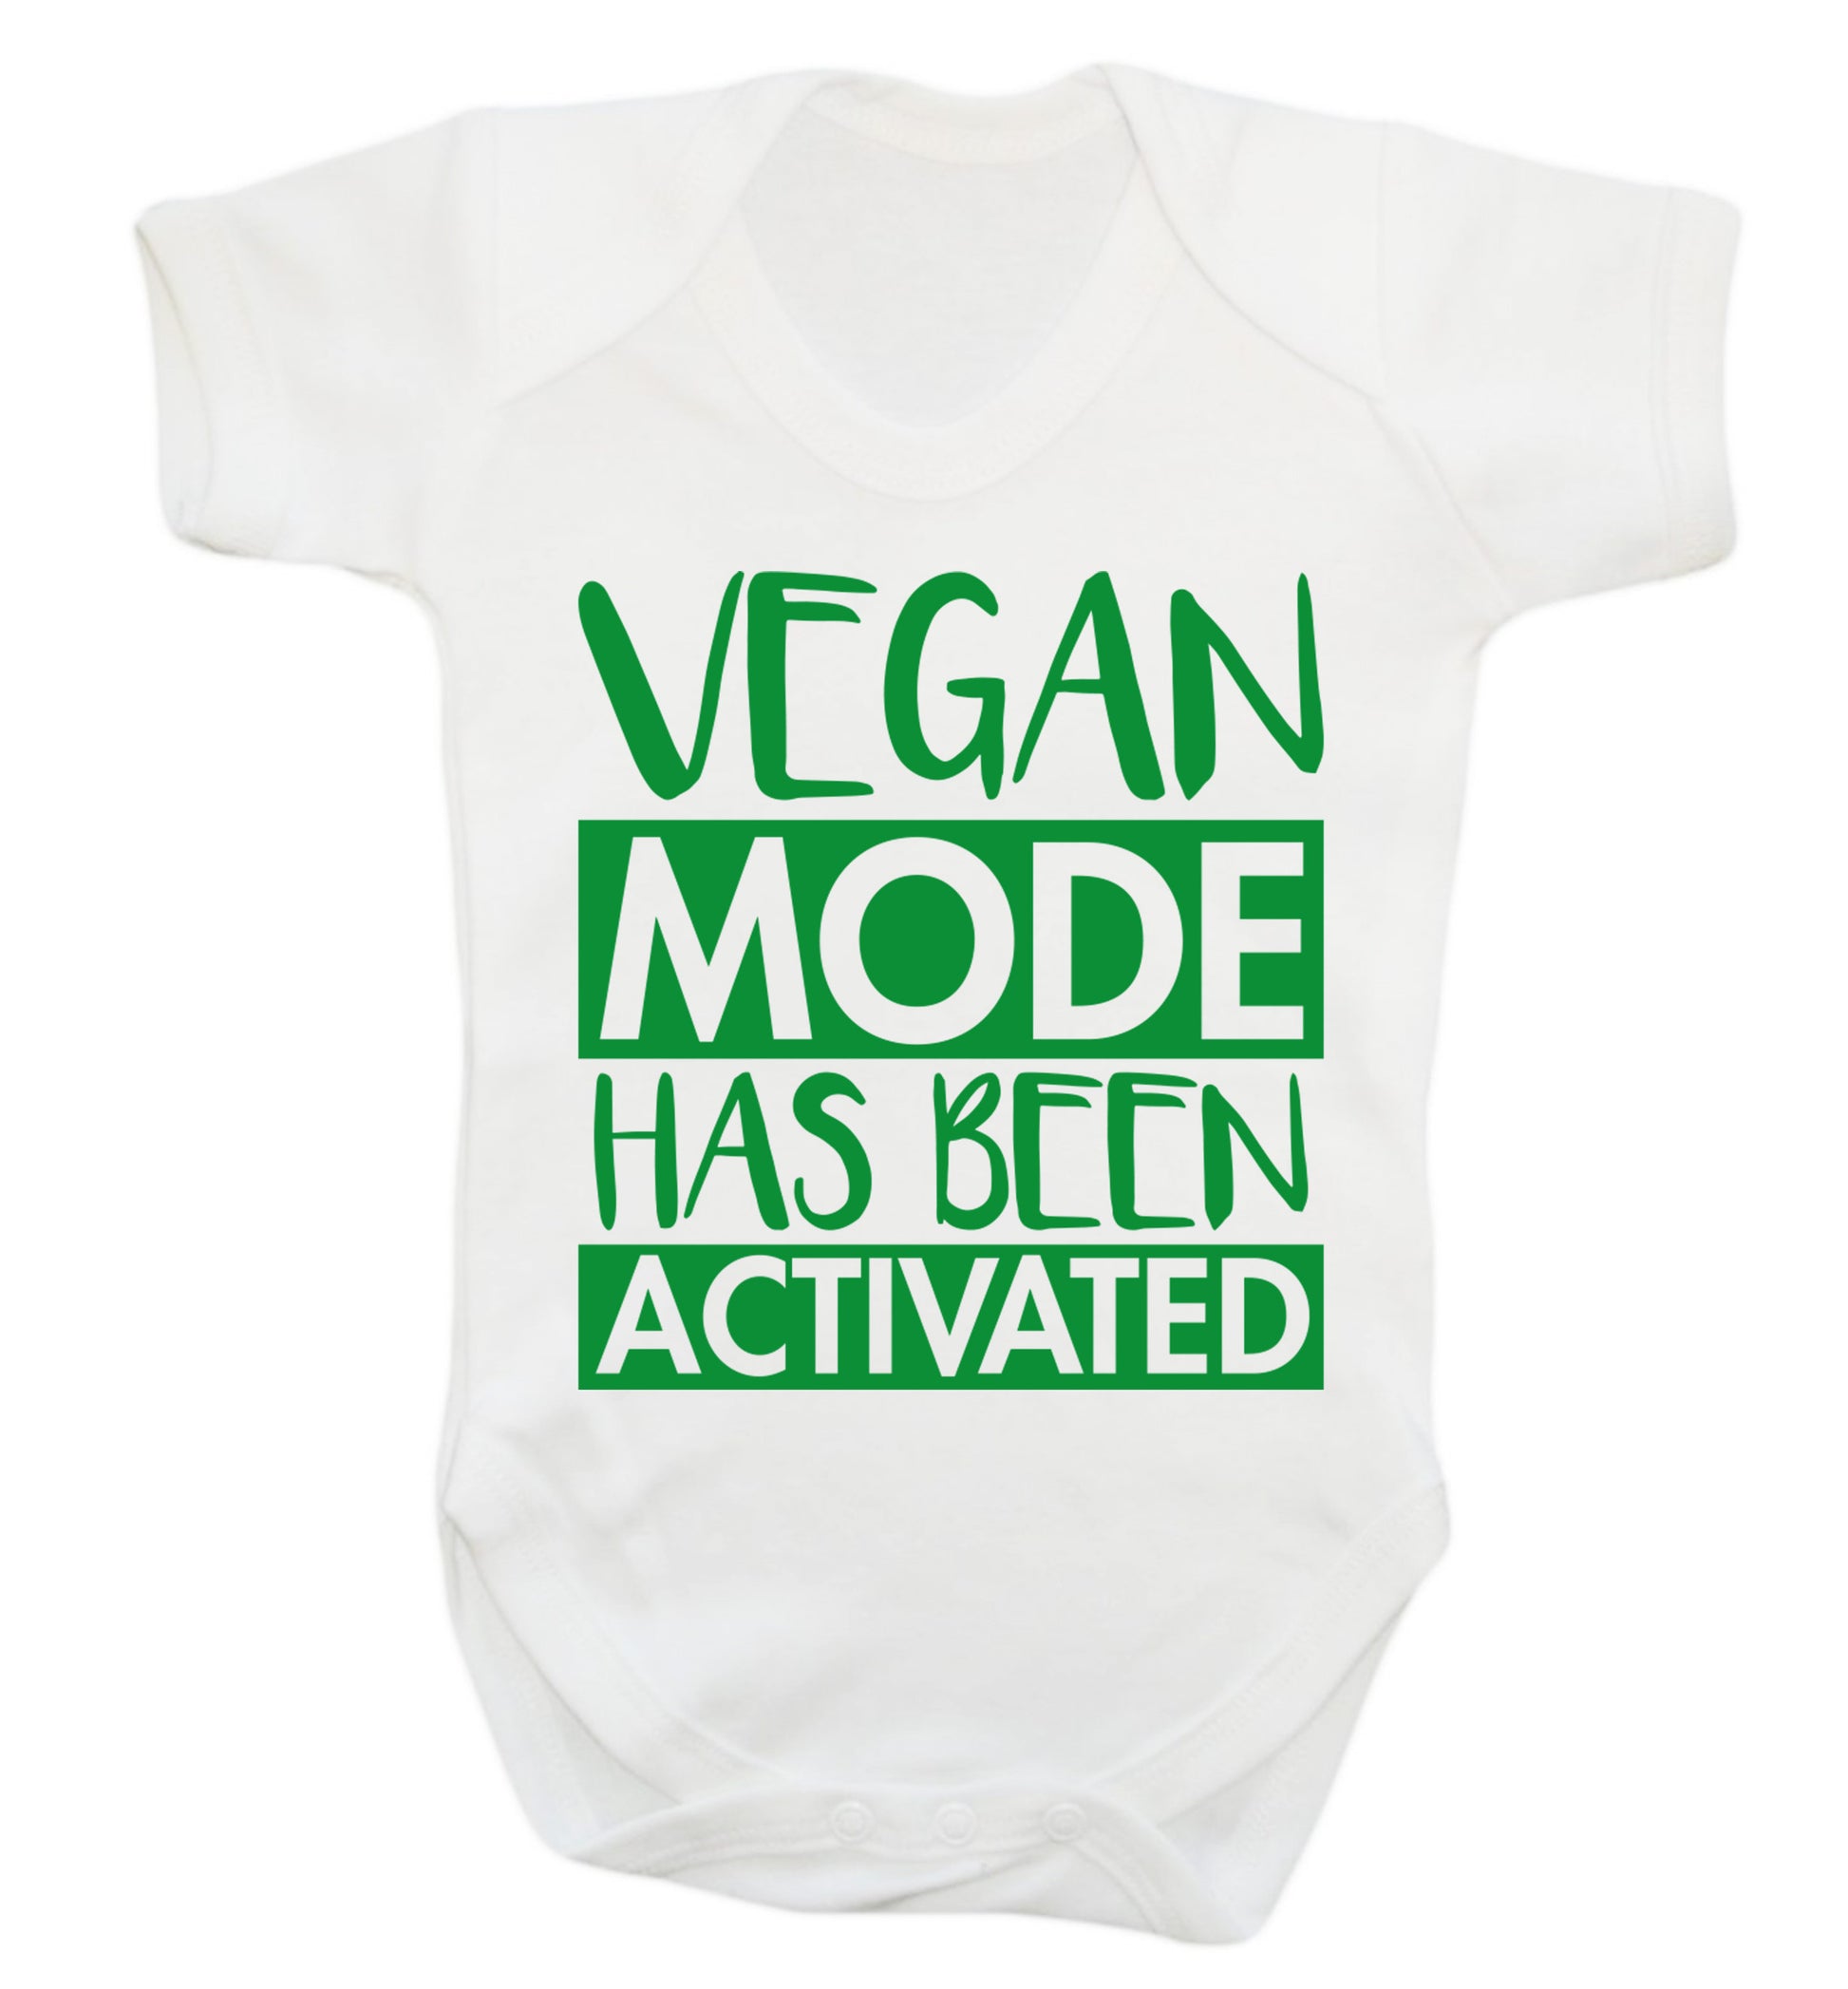 Vegan mode activated Baby Vest white 18-24 months